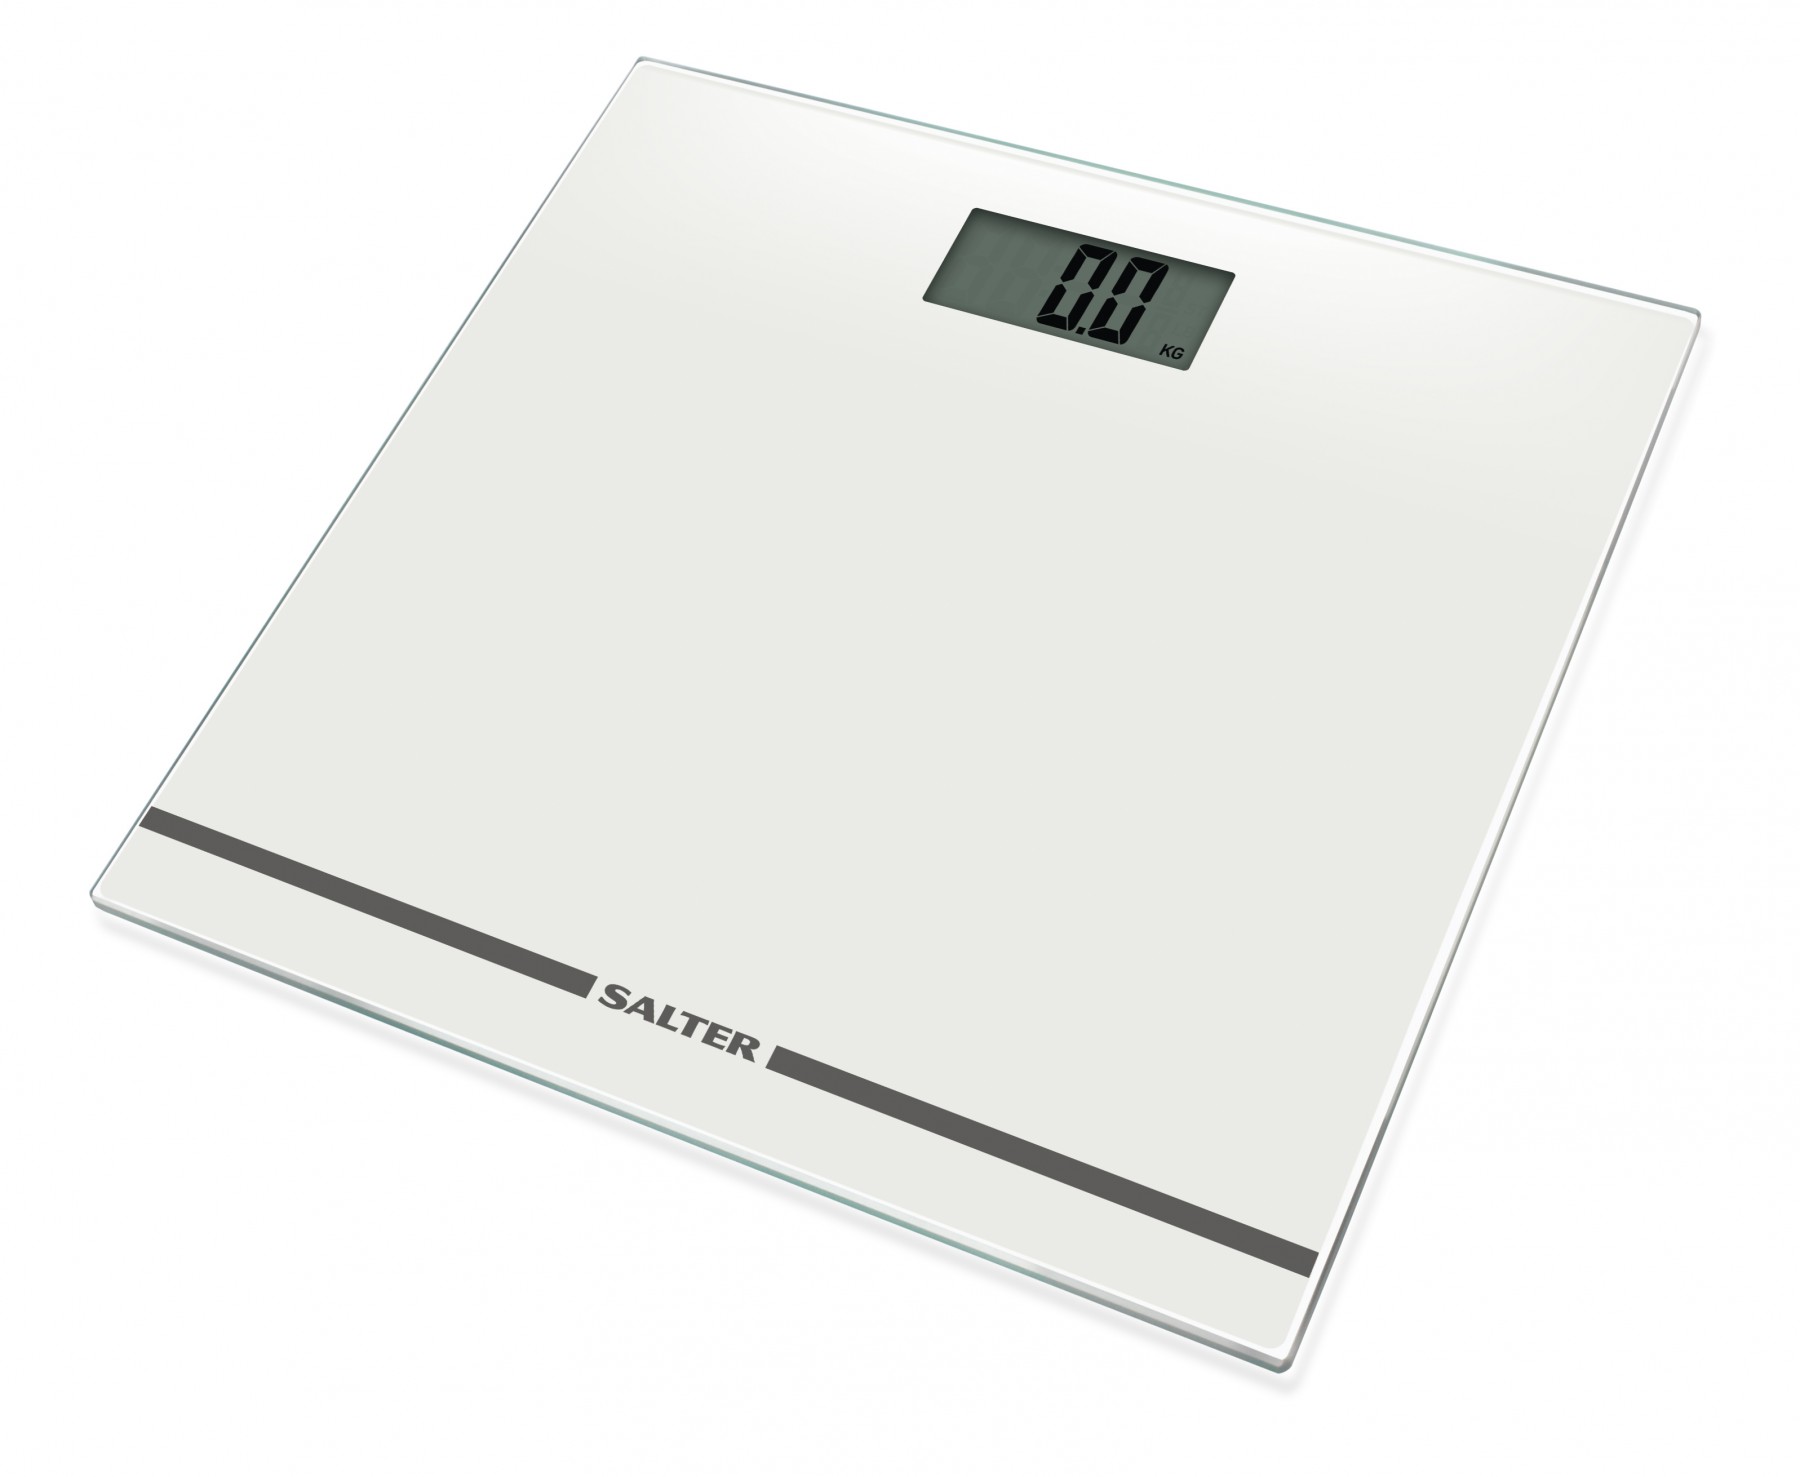 Salter 9205 WH3RLarge Display Glass Electronic Bathroom Scale - White